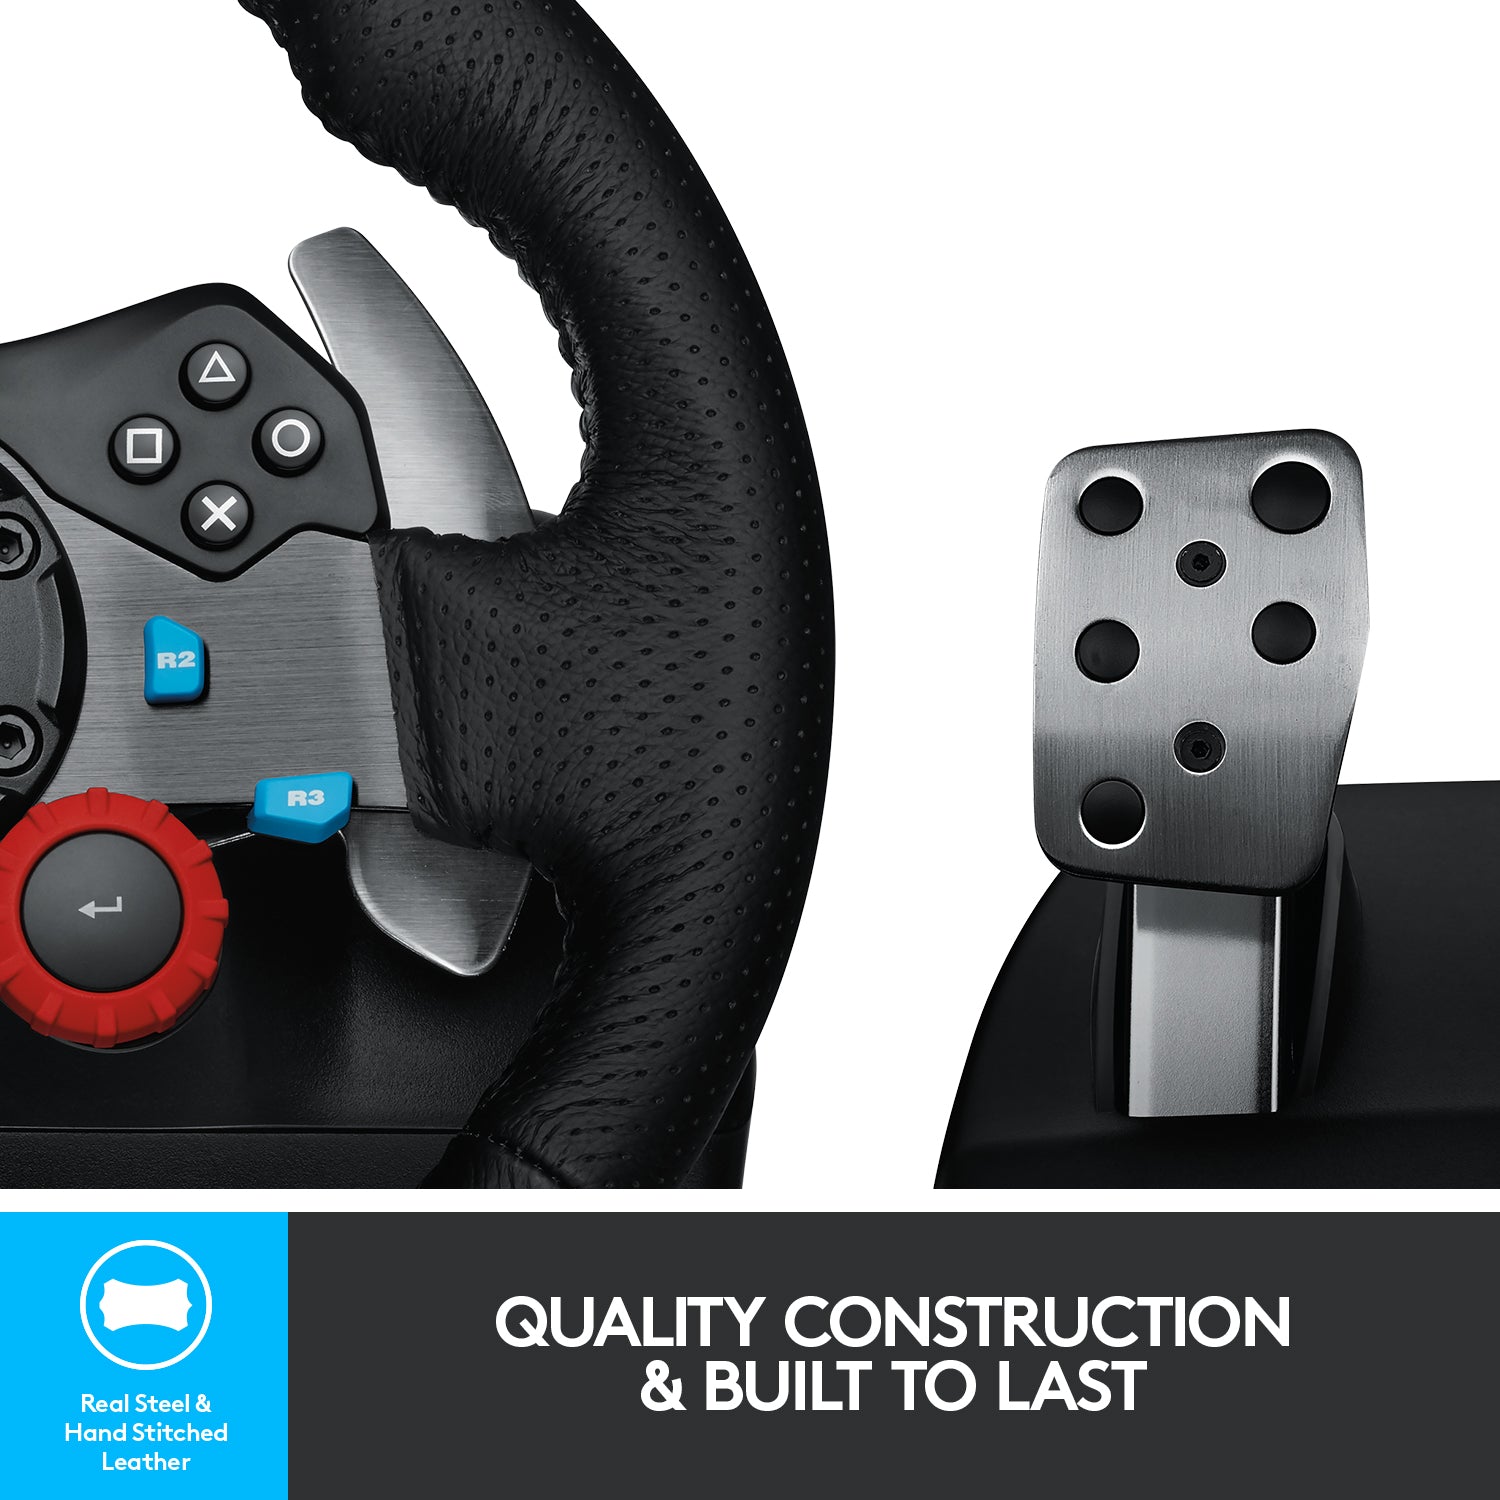 Logitech G29 Driving Force Racing Wheel for PS4, PS3 and PC